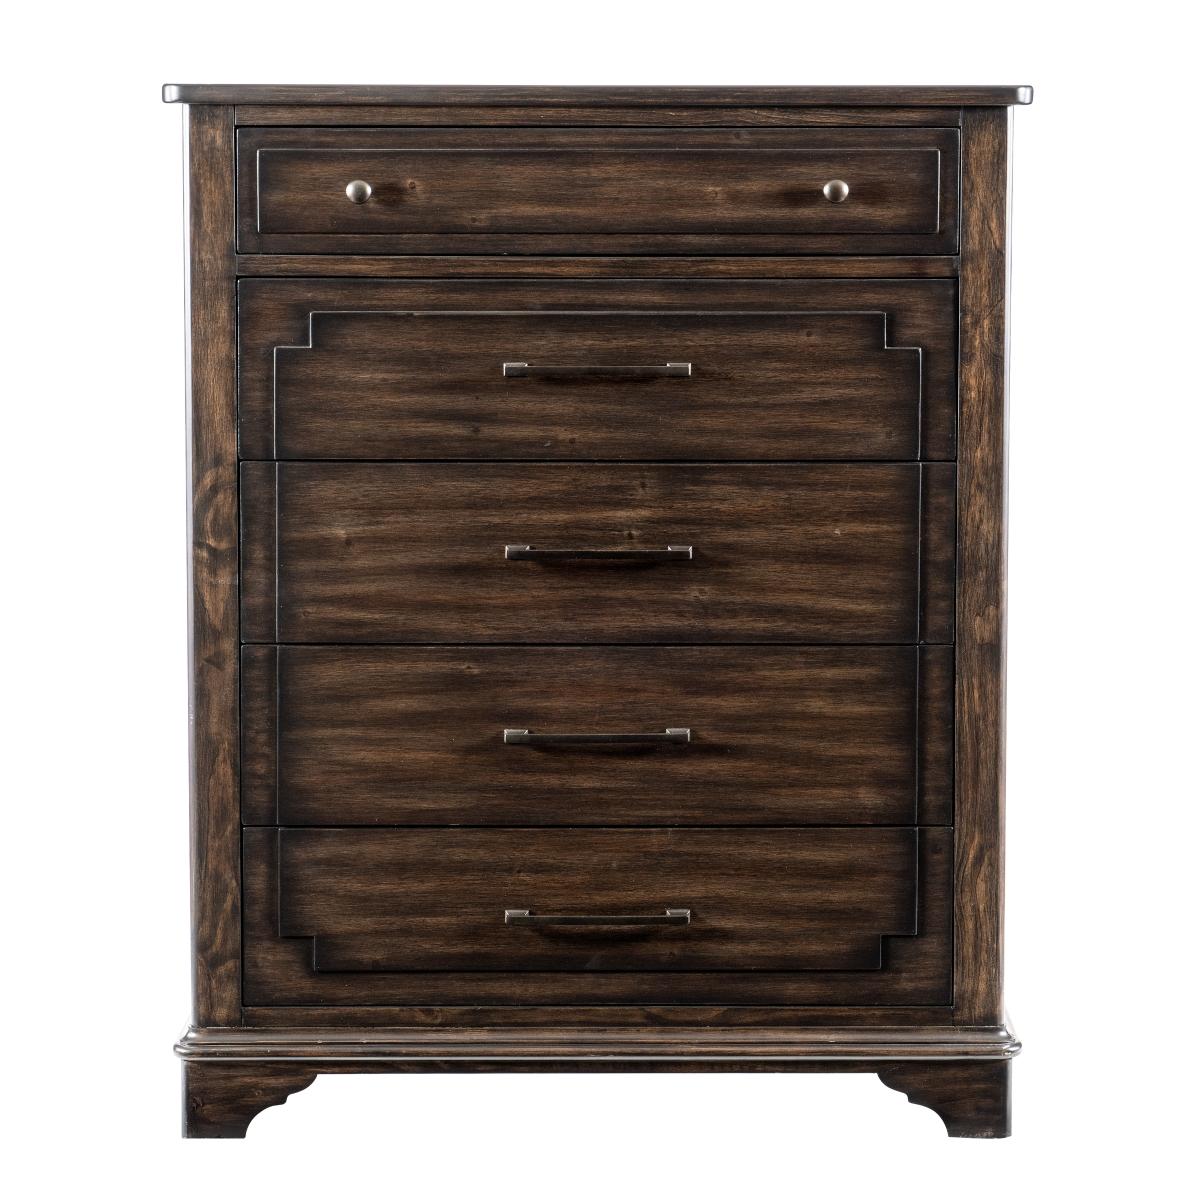 Traditional Chest 1406-9 1406-9 in Rustic Brown 